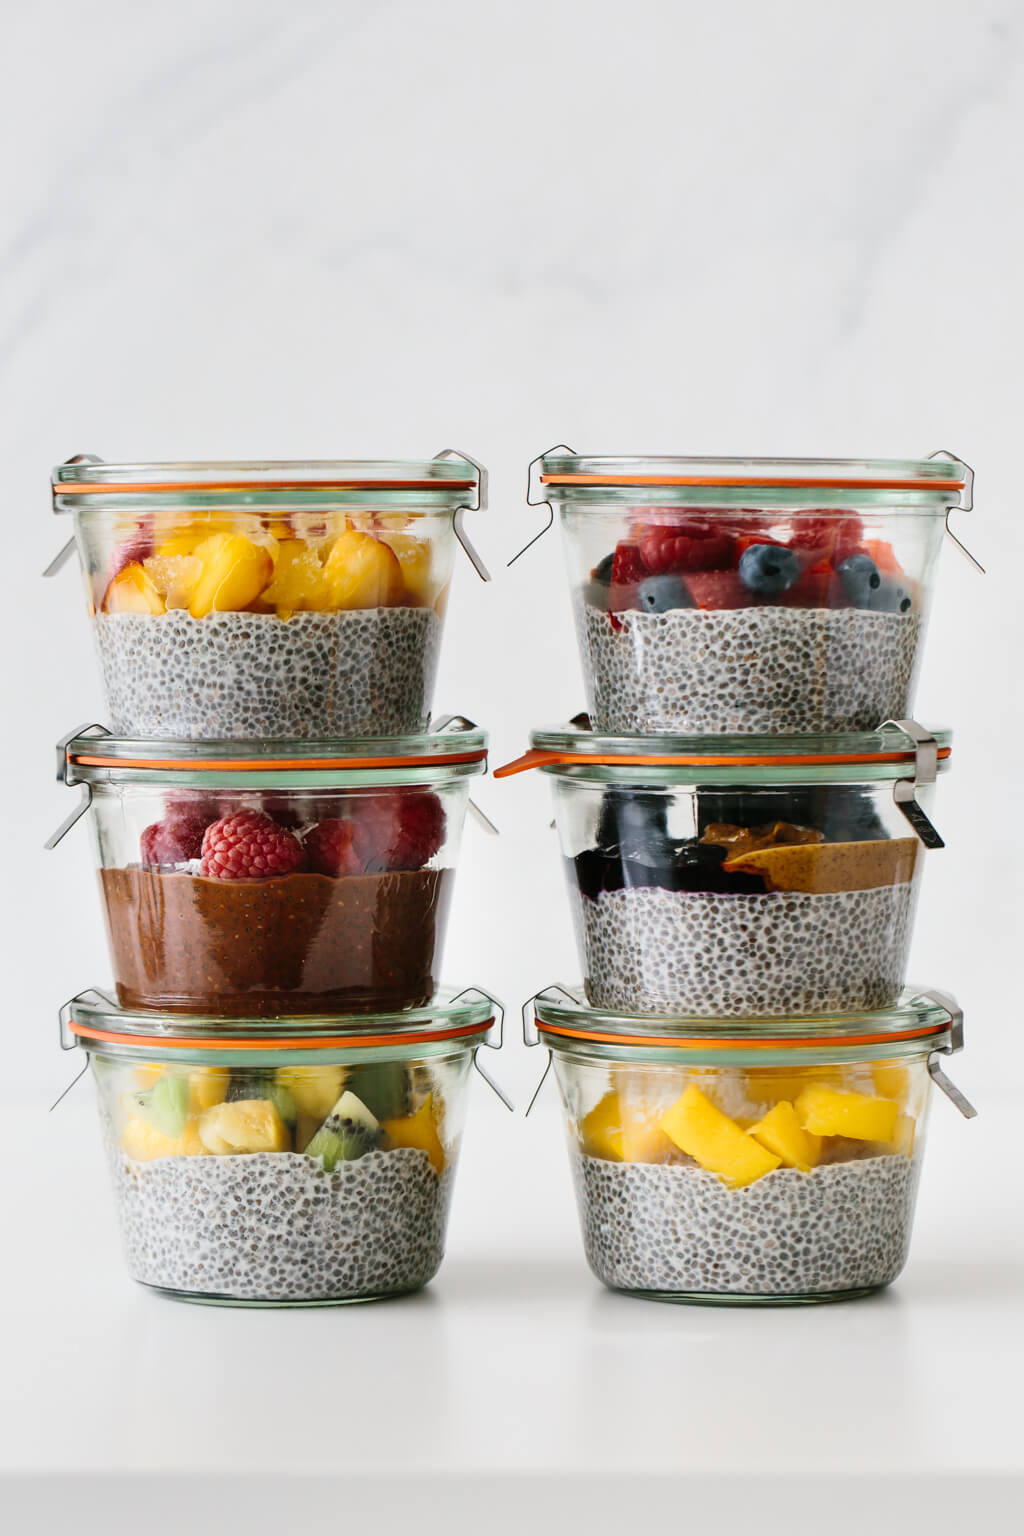 Chia pudding meal prepped into glass containers.